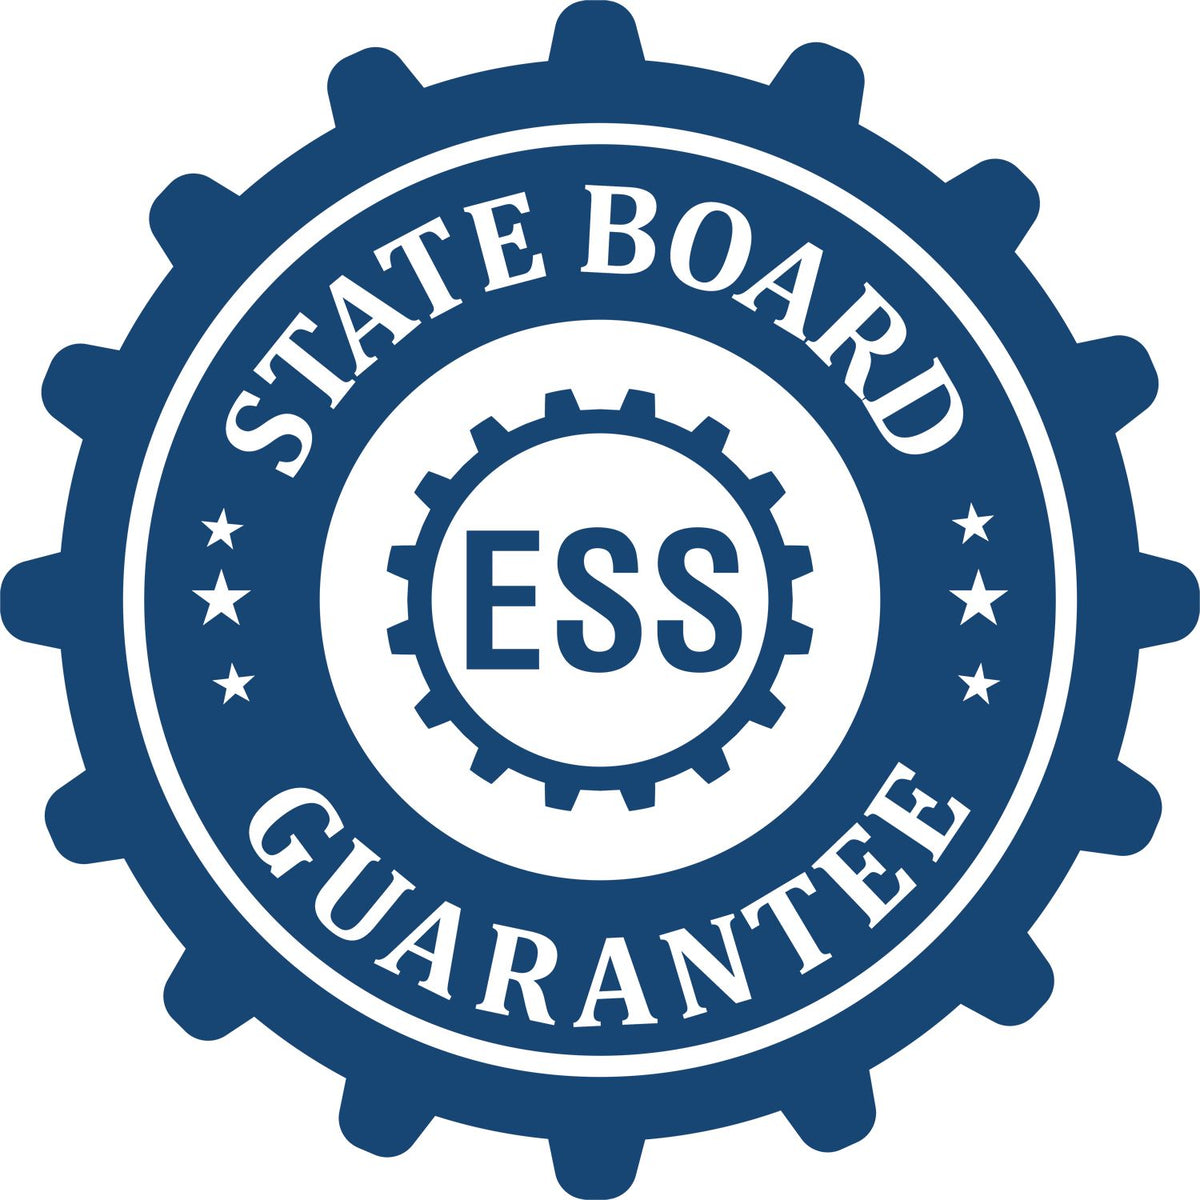 An emblem in a gear shape illustrating a state board guarantee for the Soft Tennessee Professional Engineer Seal product.